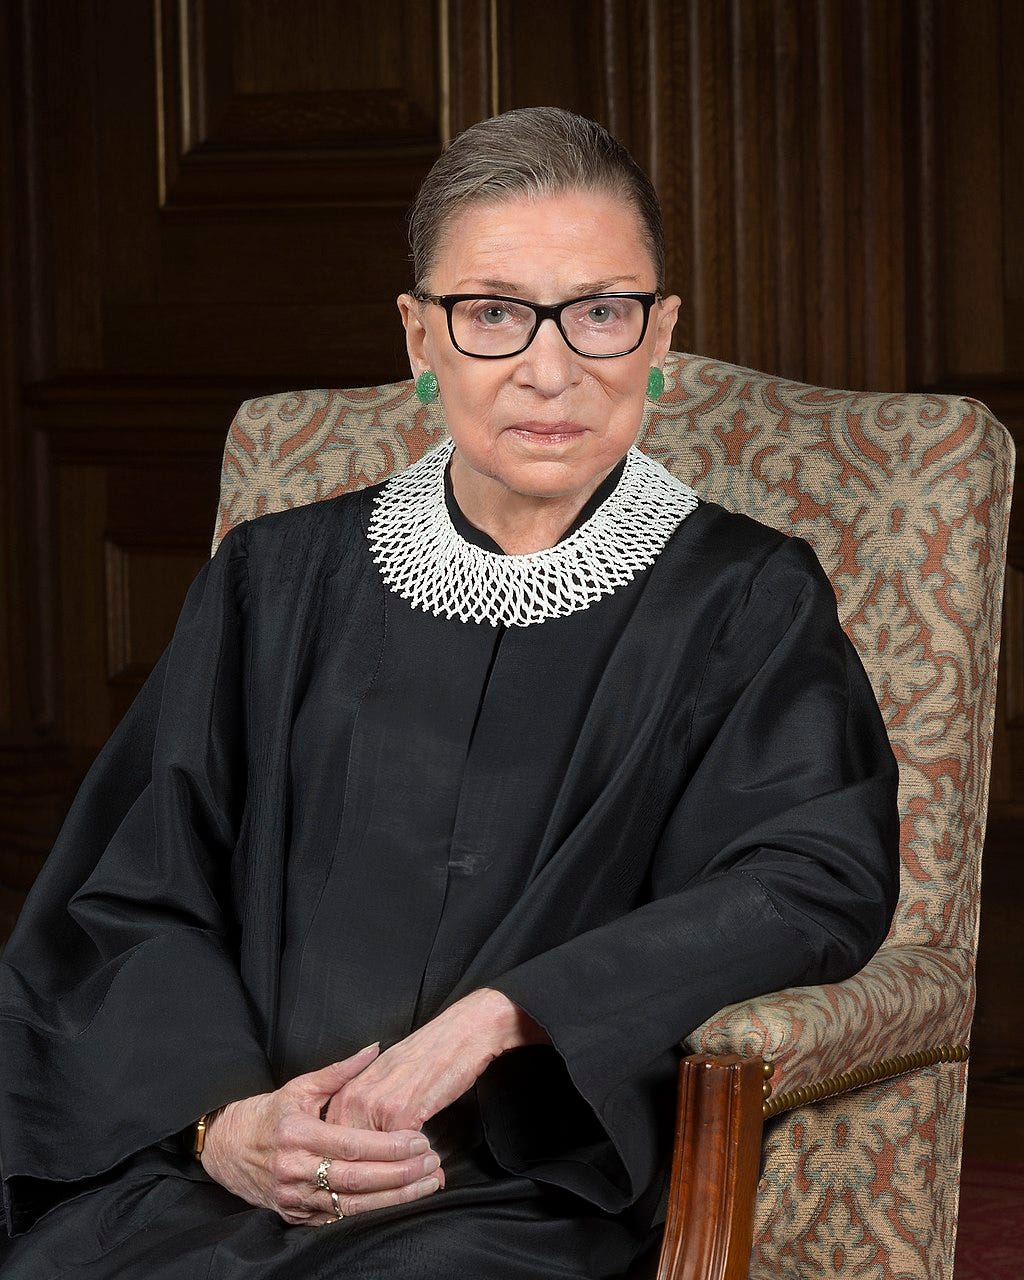 Ginsburg seated in her robe